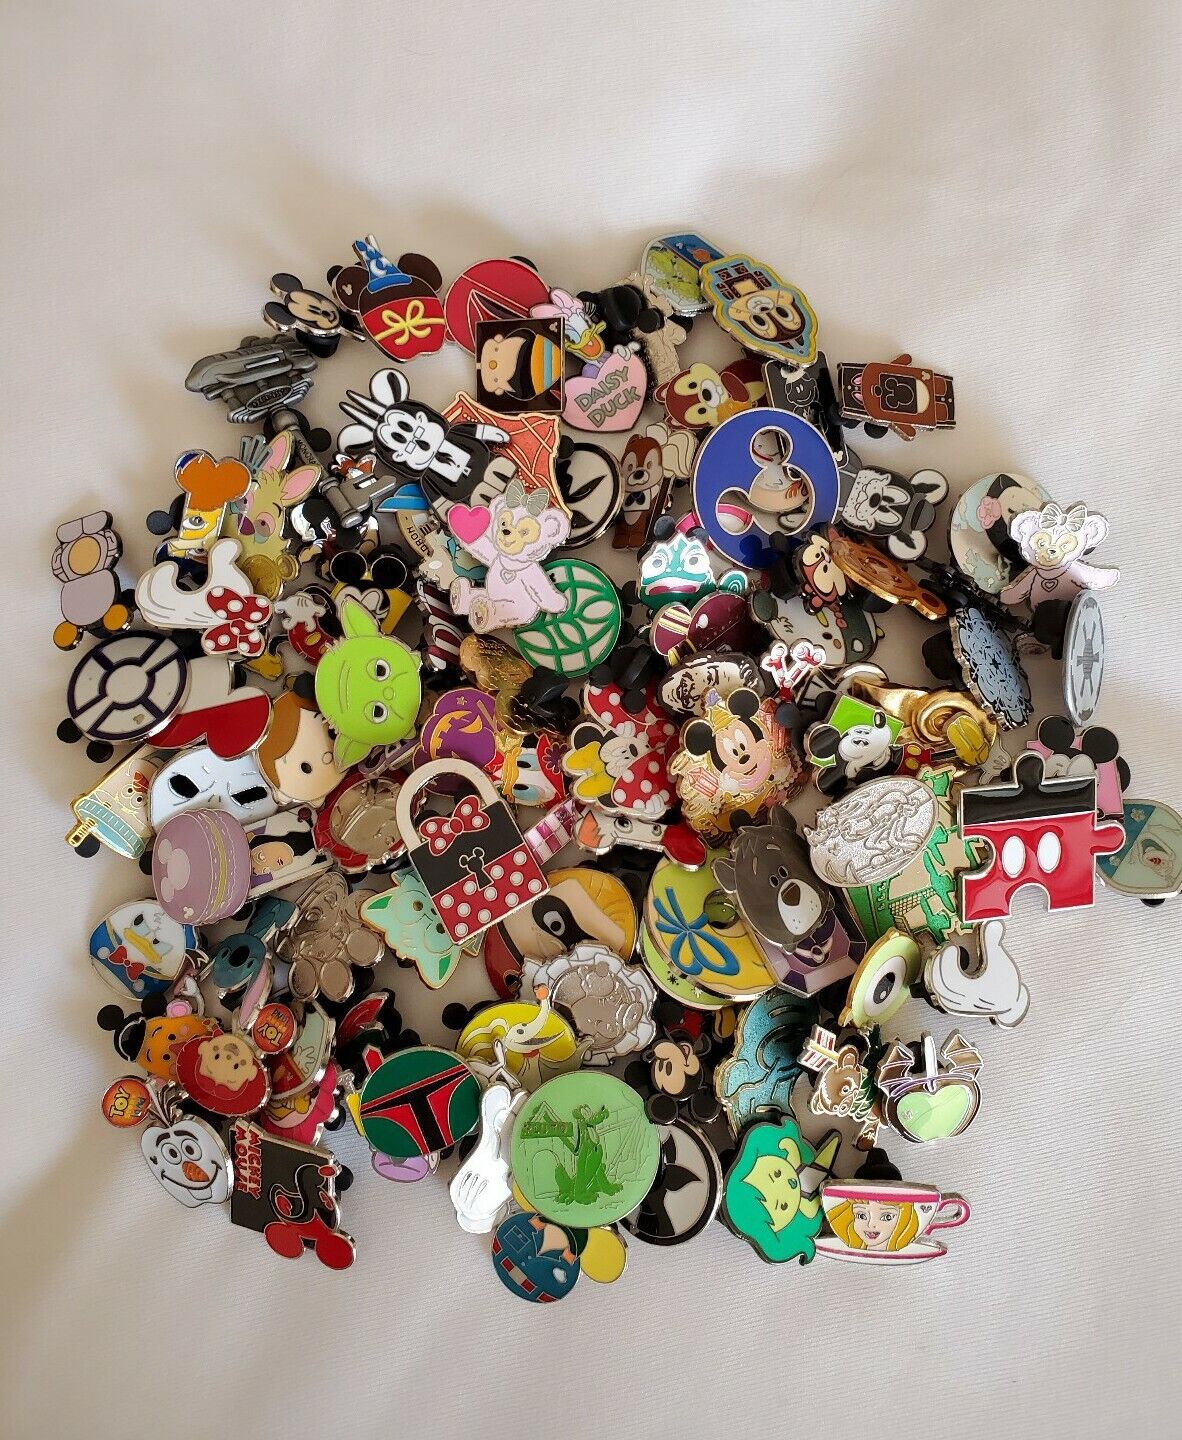 DISNEY TRADING PIN LOT 200 DIFFERENT PINS, NO DOUBLES Free Priority 1-3Day Ship